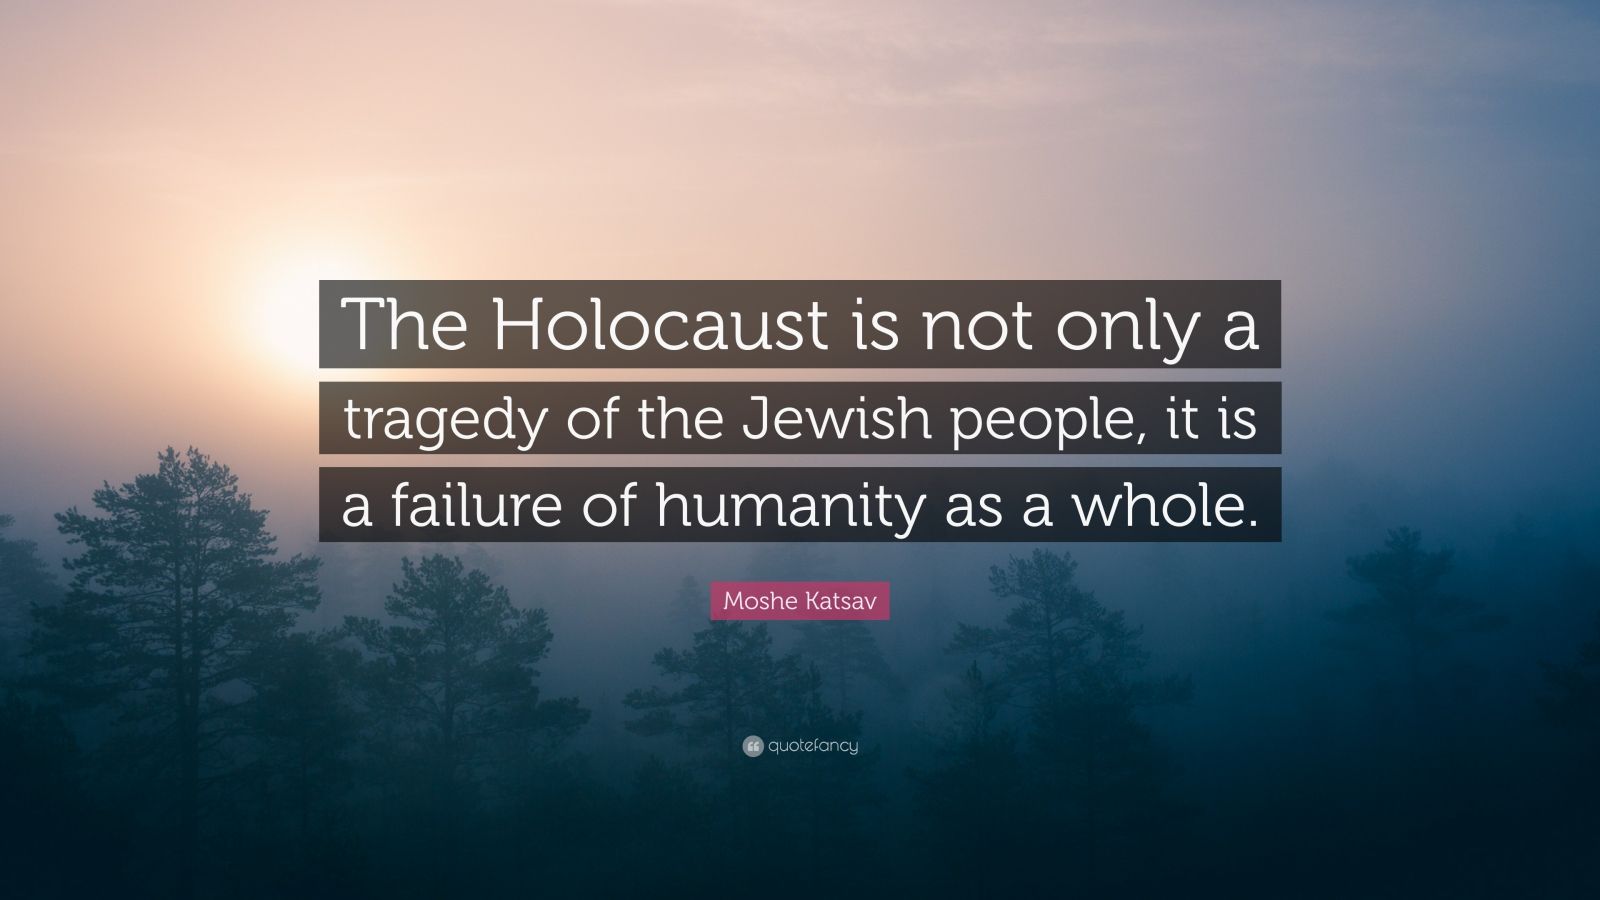 Moshe Katsav Quote: “The Holocaust is not only a tragedy of the Jewish